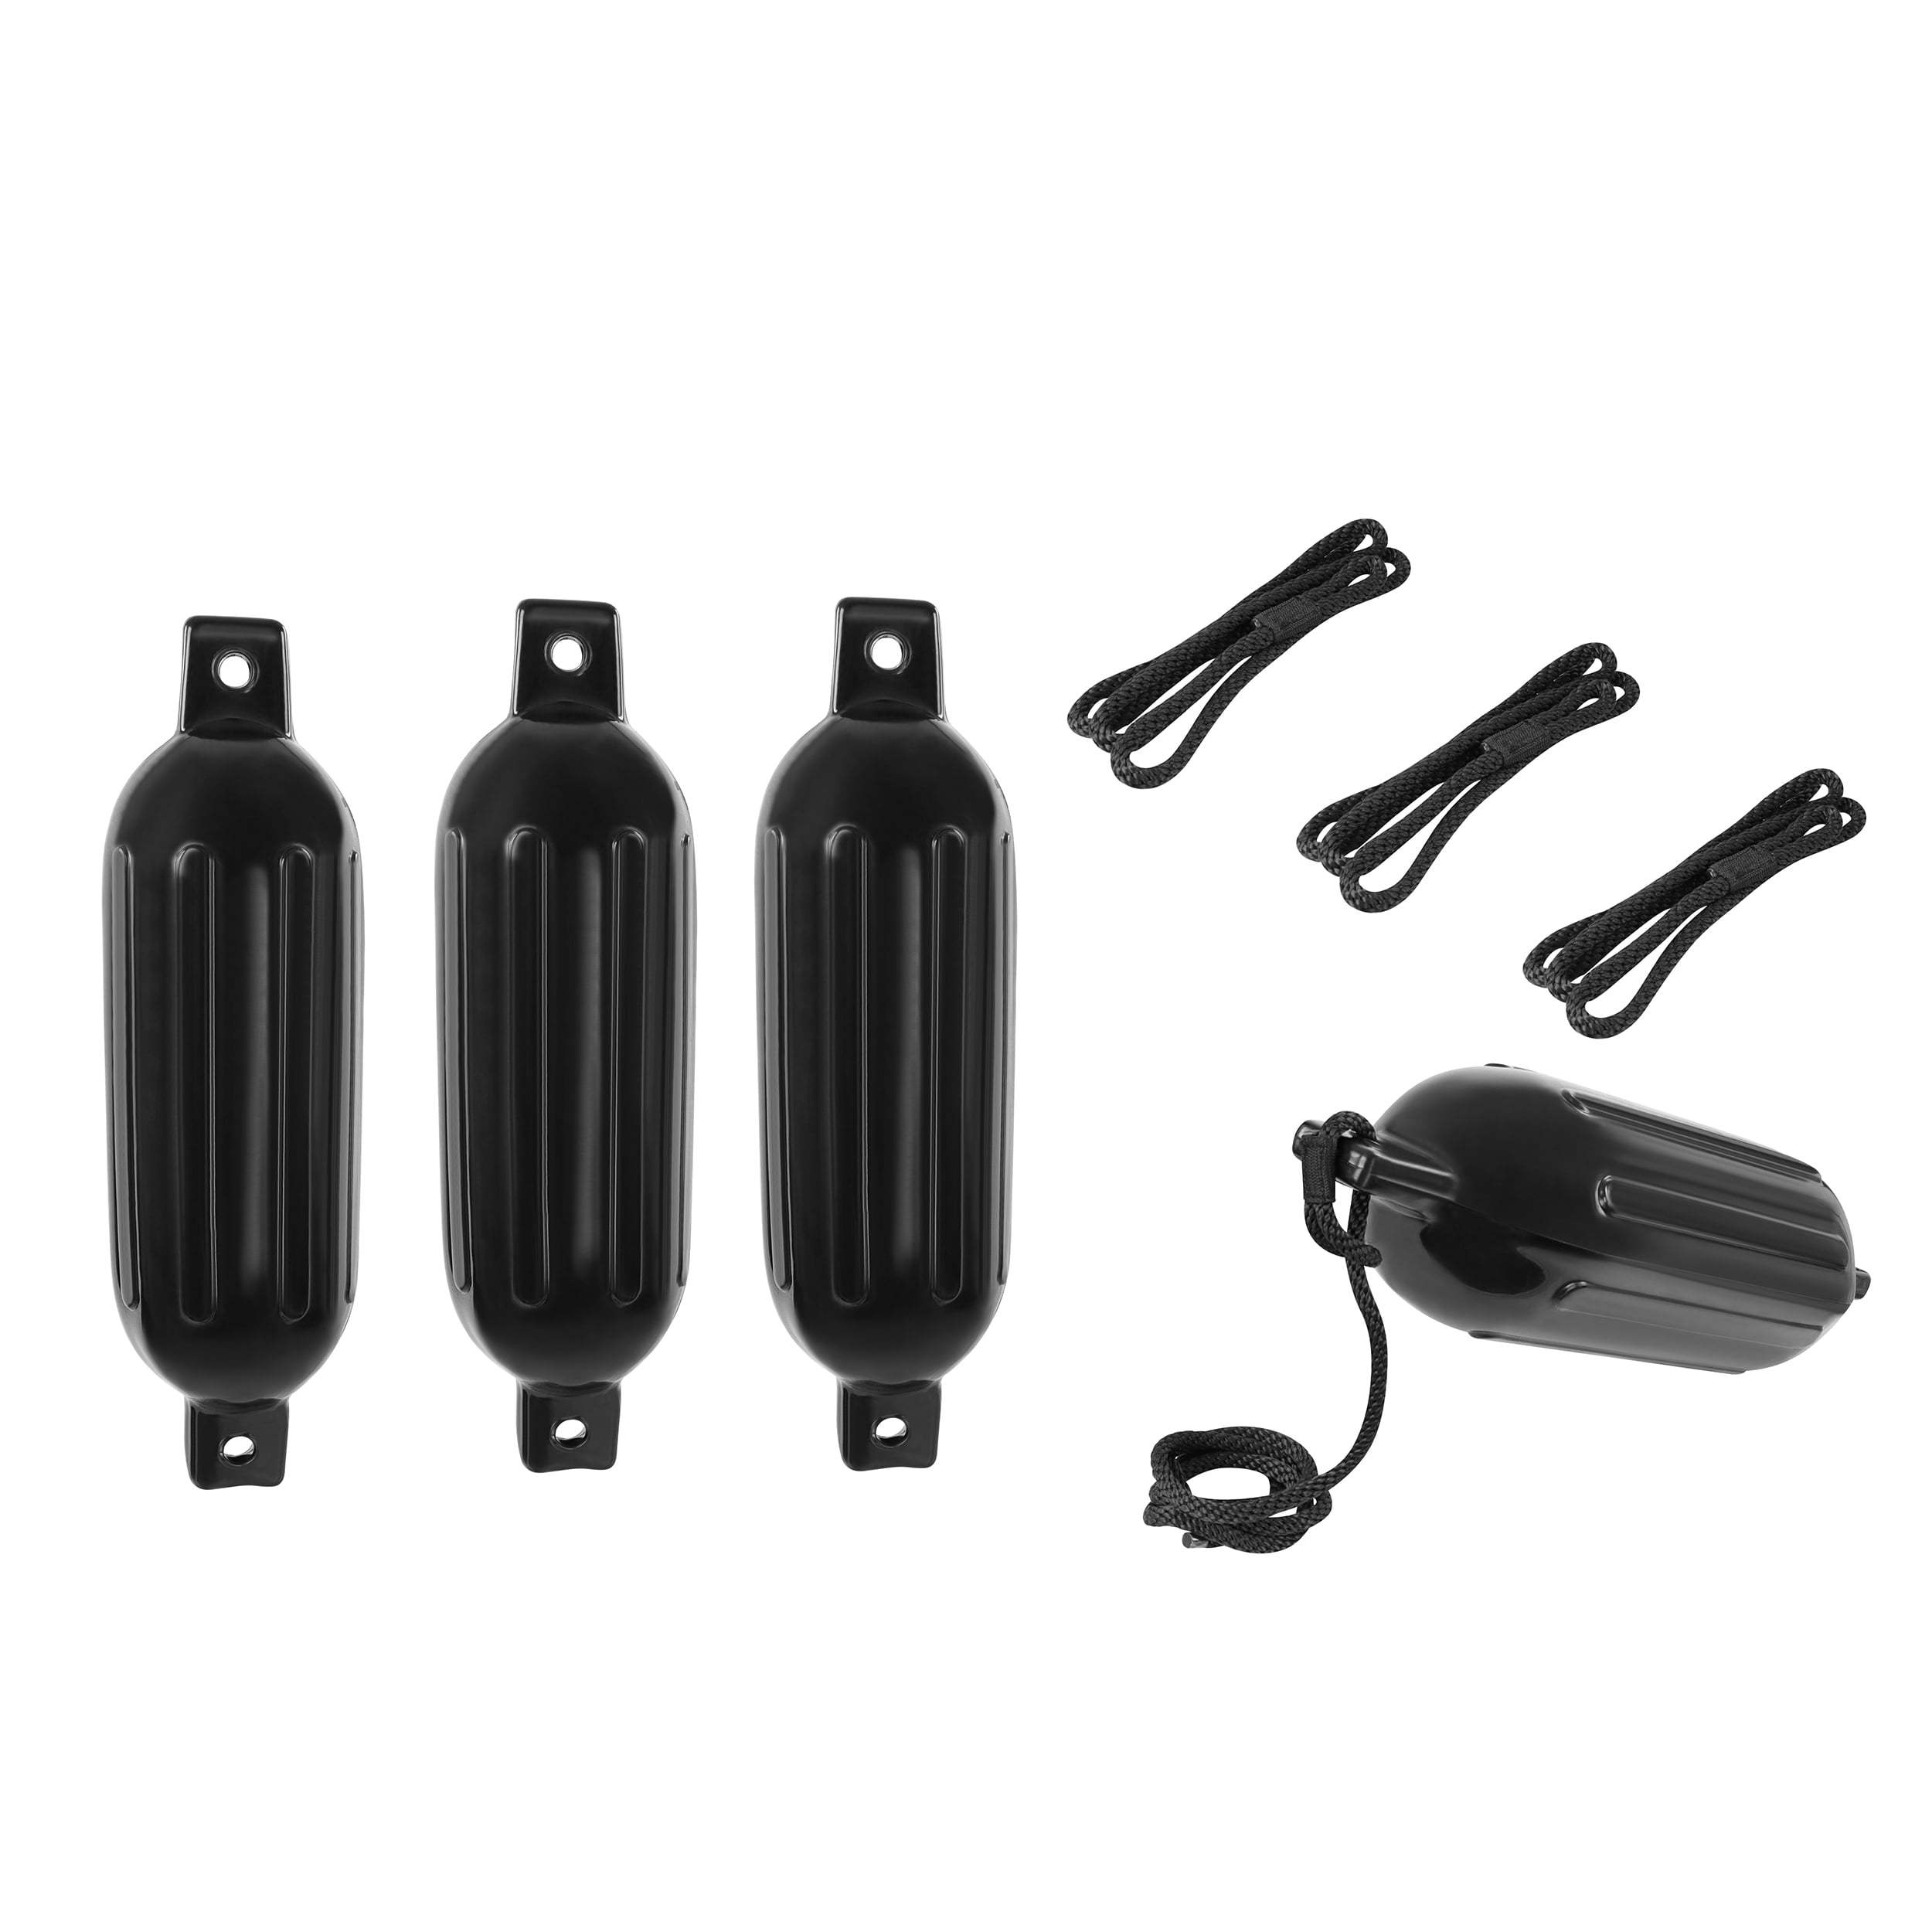 2 Pk Boat Fenders for Dock Boat Bumpers for Docking with Pump Boat  Accessories Dock Bumpers Set Buoys Pontoons Black Buoy Fender Boat 23 x  6.5 